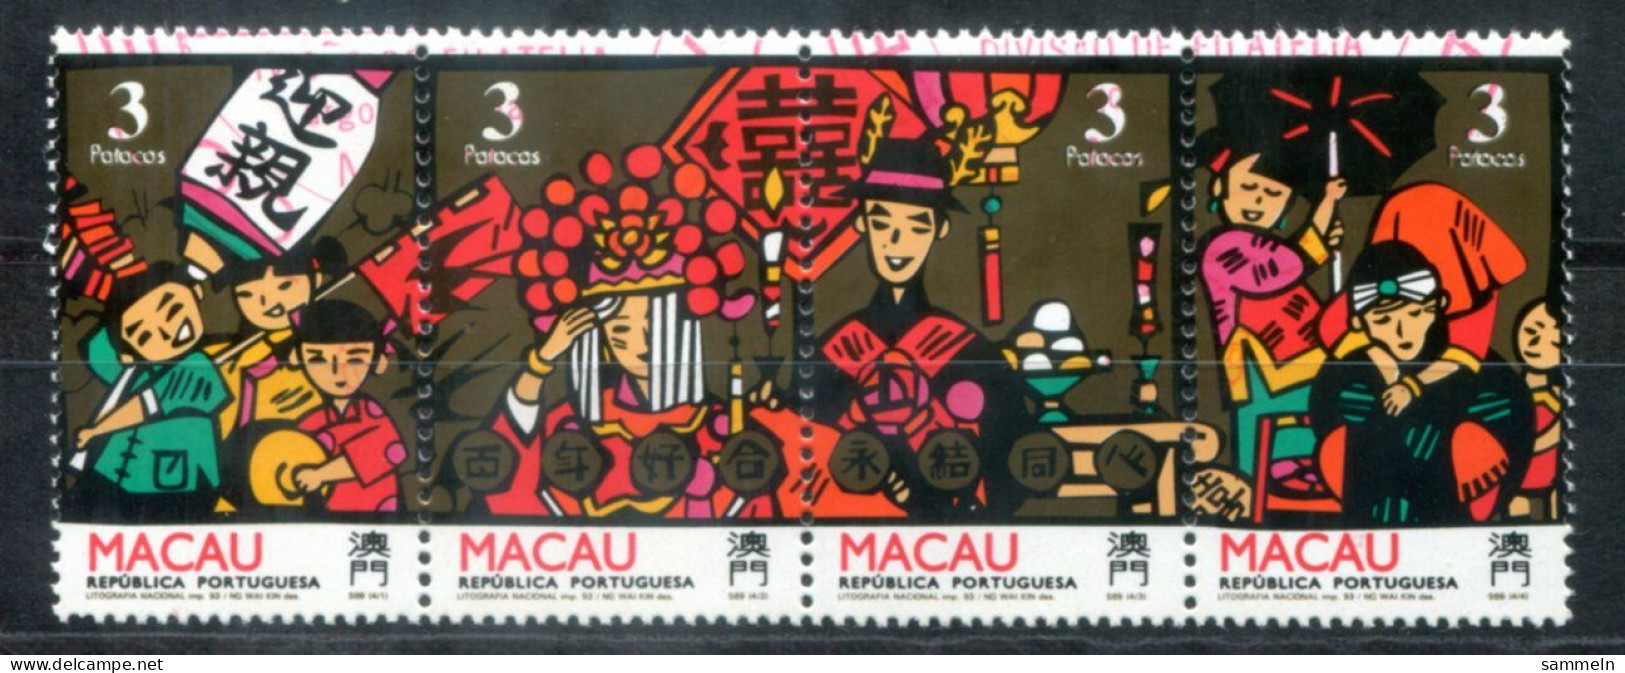 MACAO 721-724 ZDr. Canc. - MACAU - Used Stamps